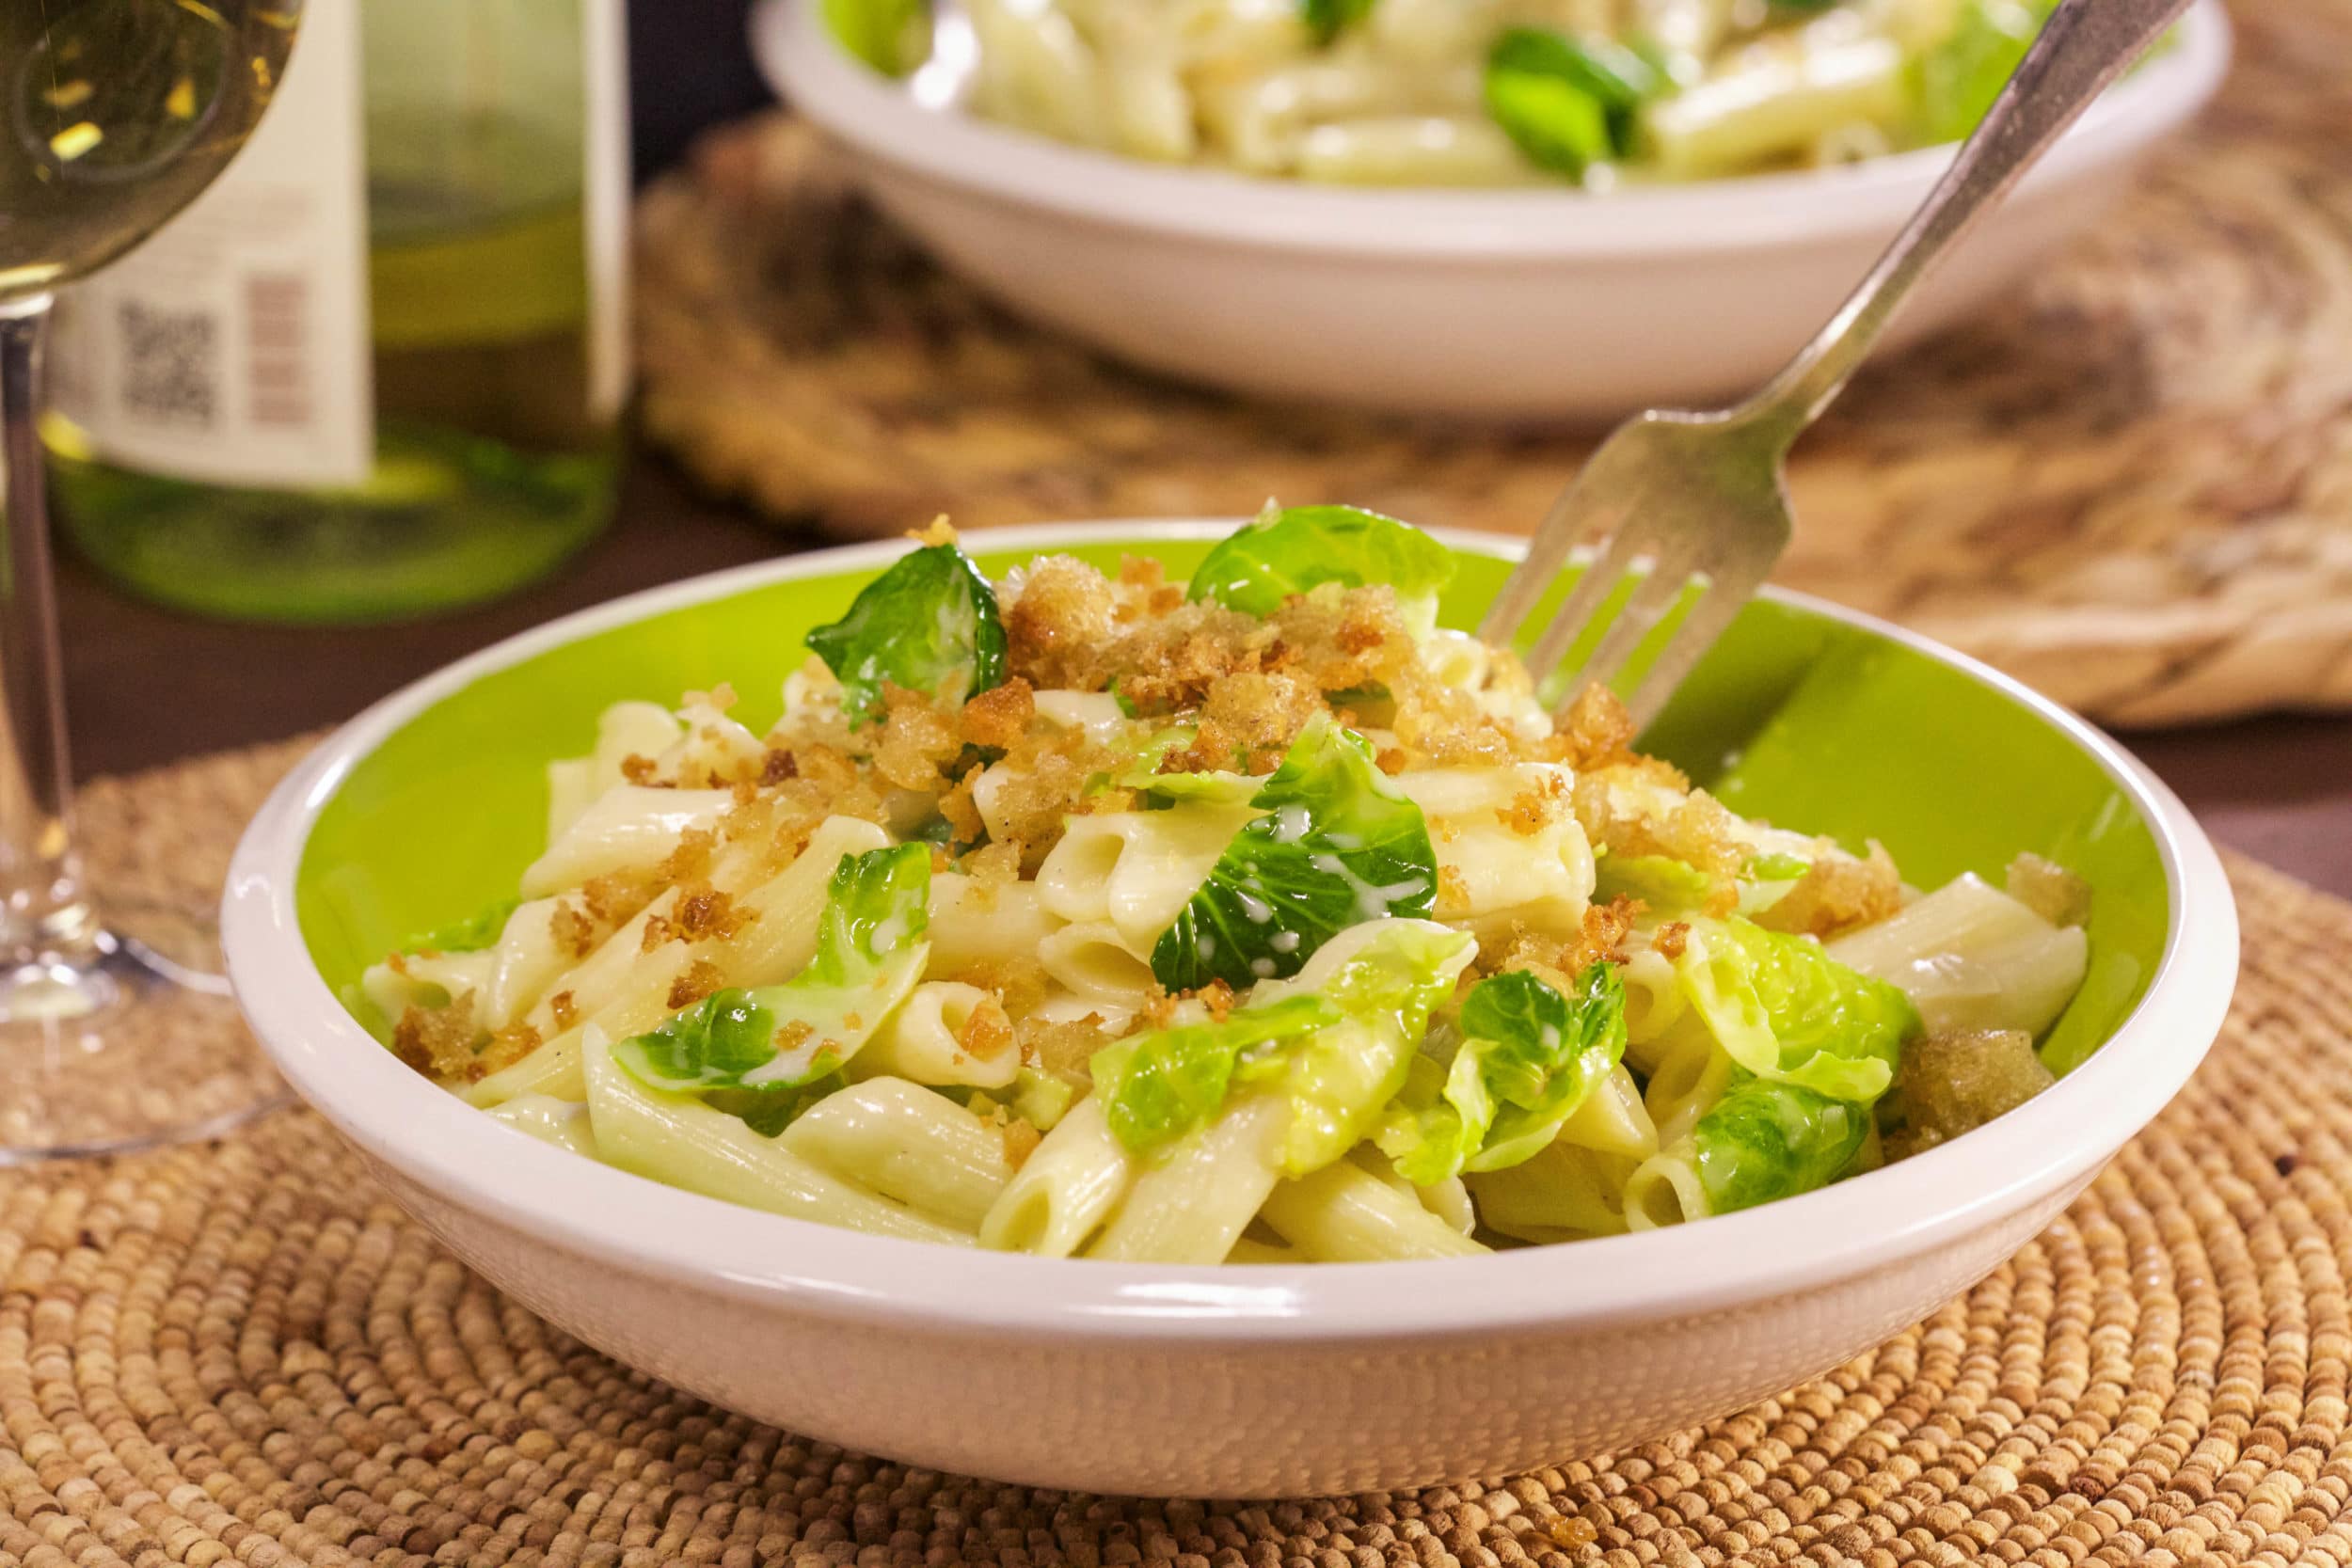 Three-Cheese Pasta with Brussels Sprouts